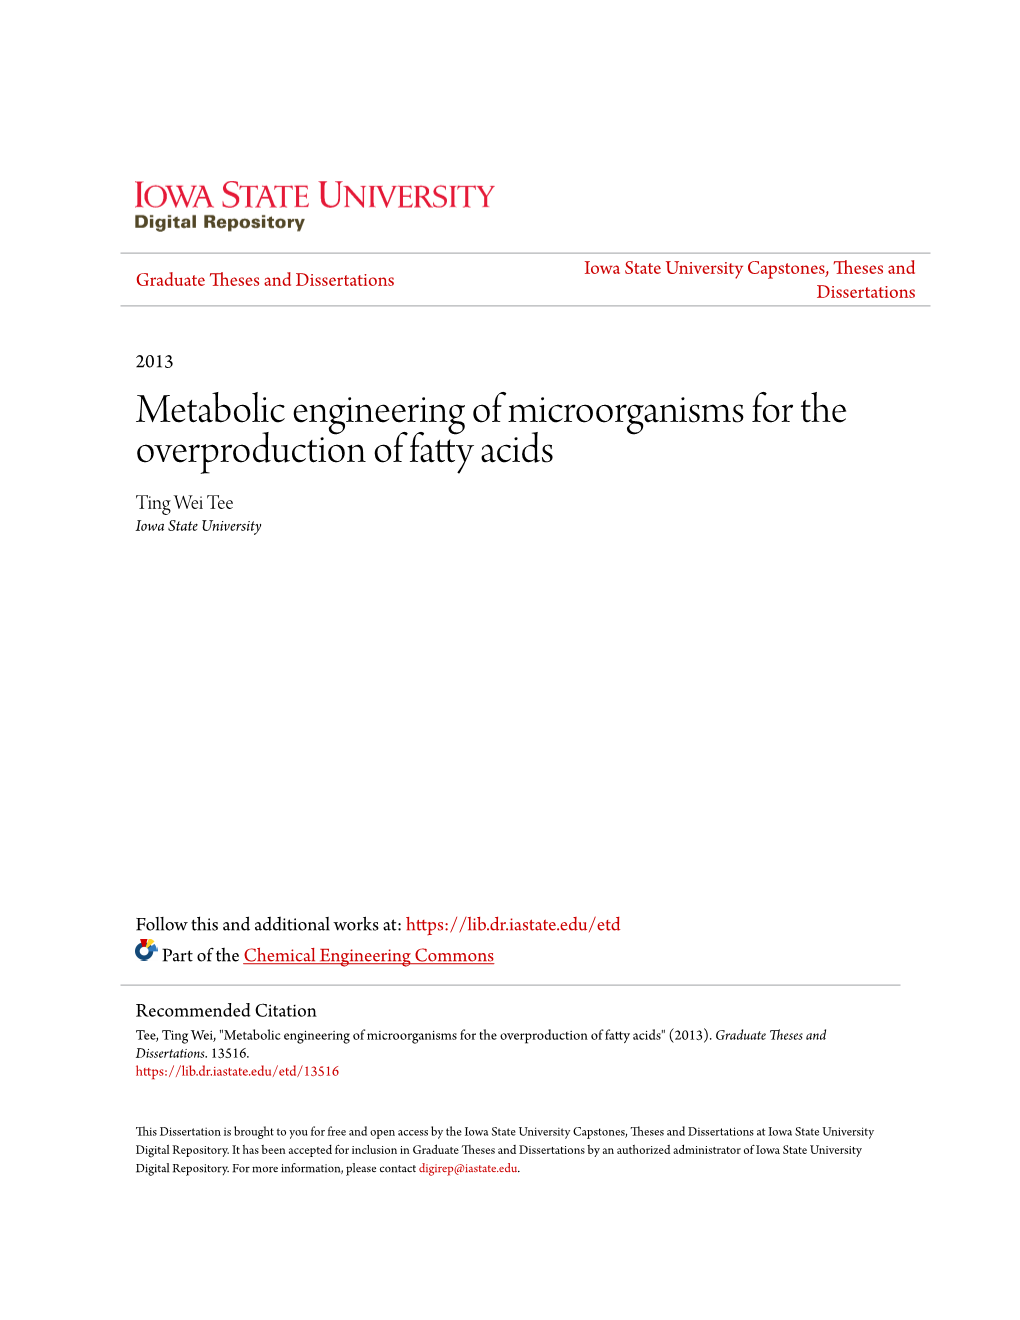 Metabolic Engineering of Microorganisms for the Overproduction of Fatty Acids Ting Wei Tee Iowa State University